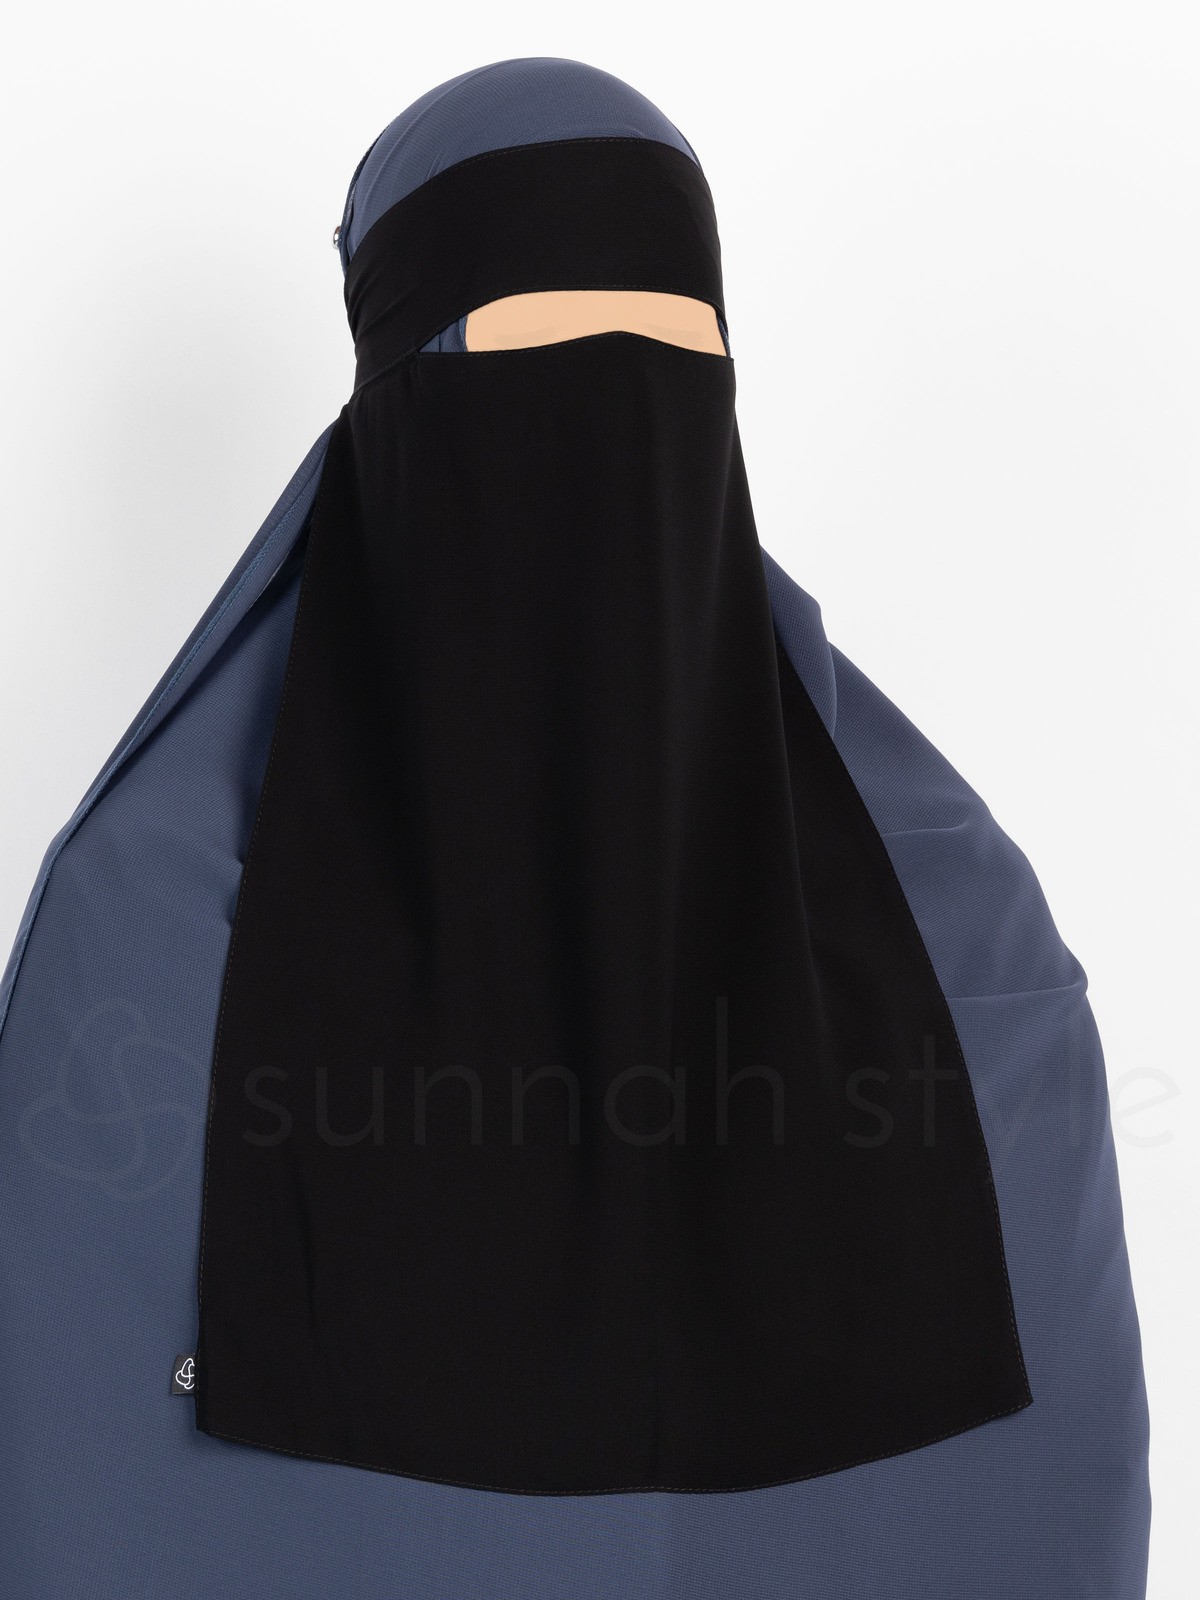 Sunnah Style - One Layer Niqab (Black)